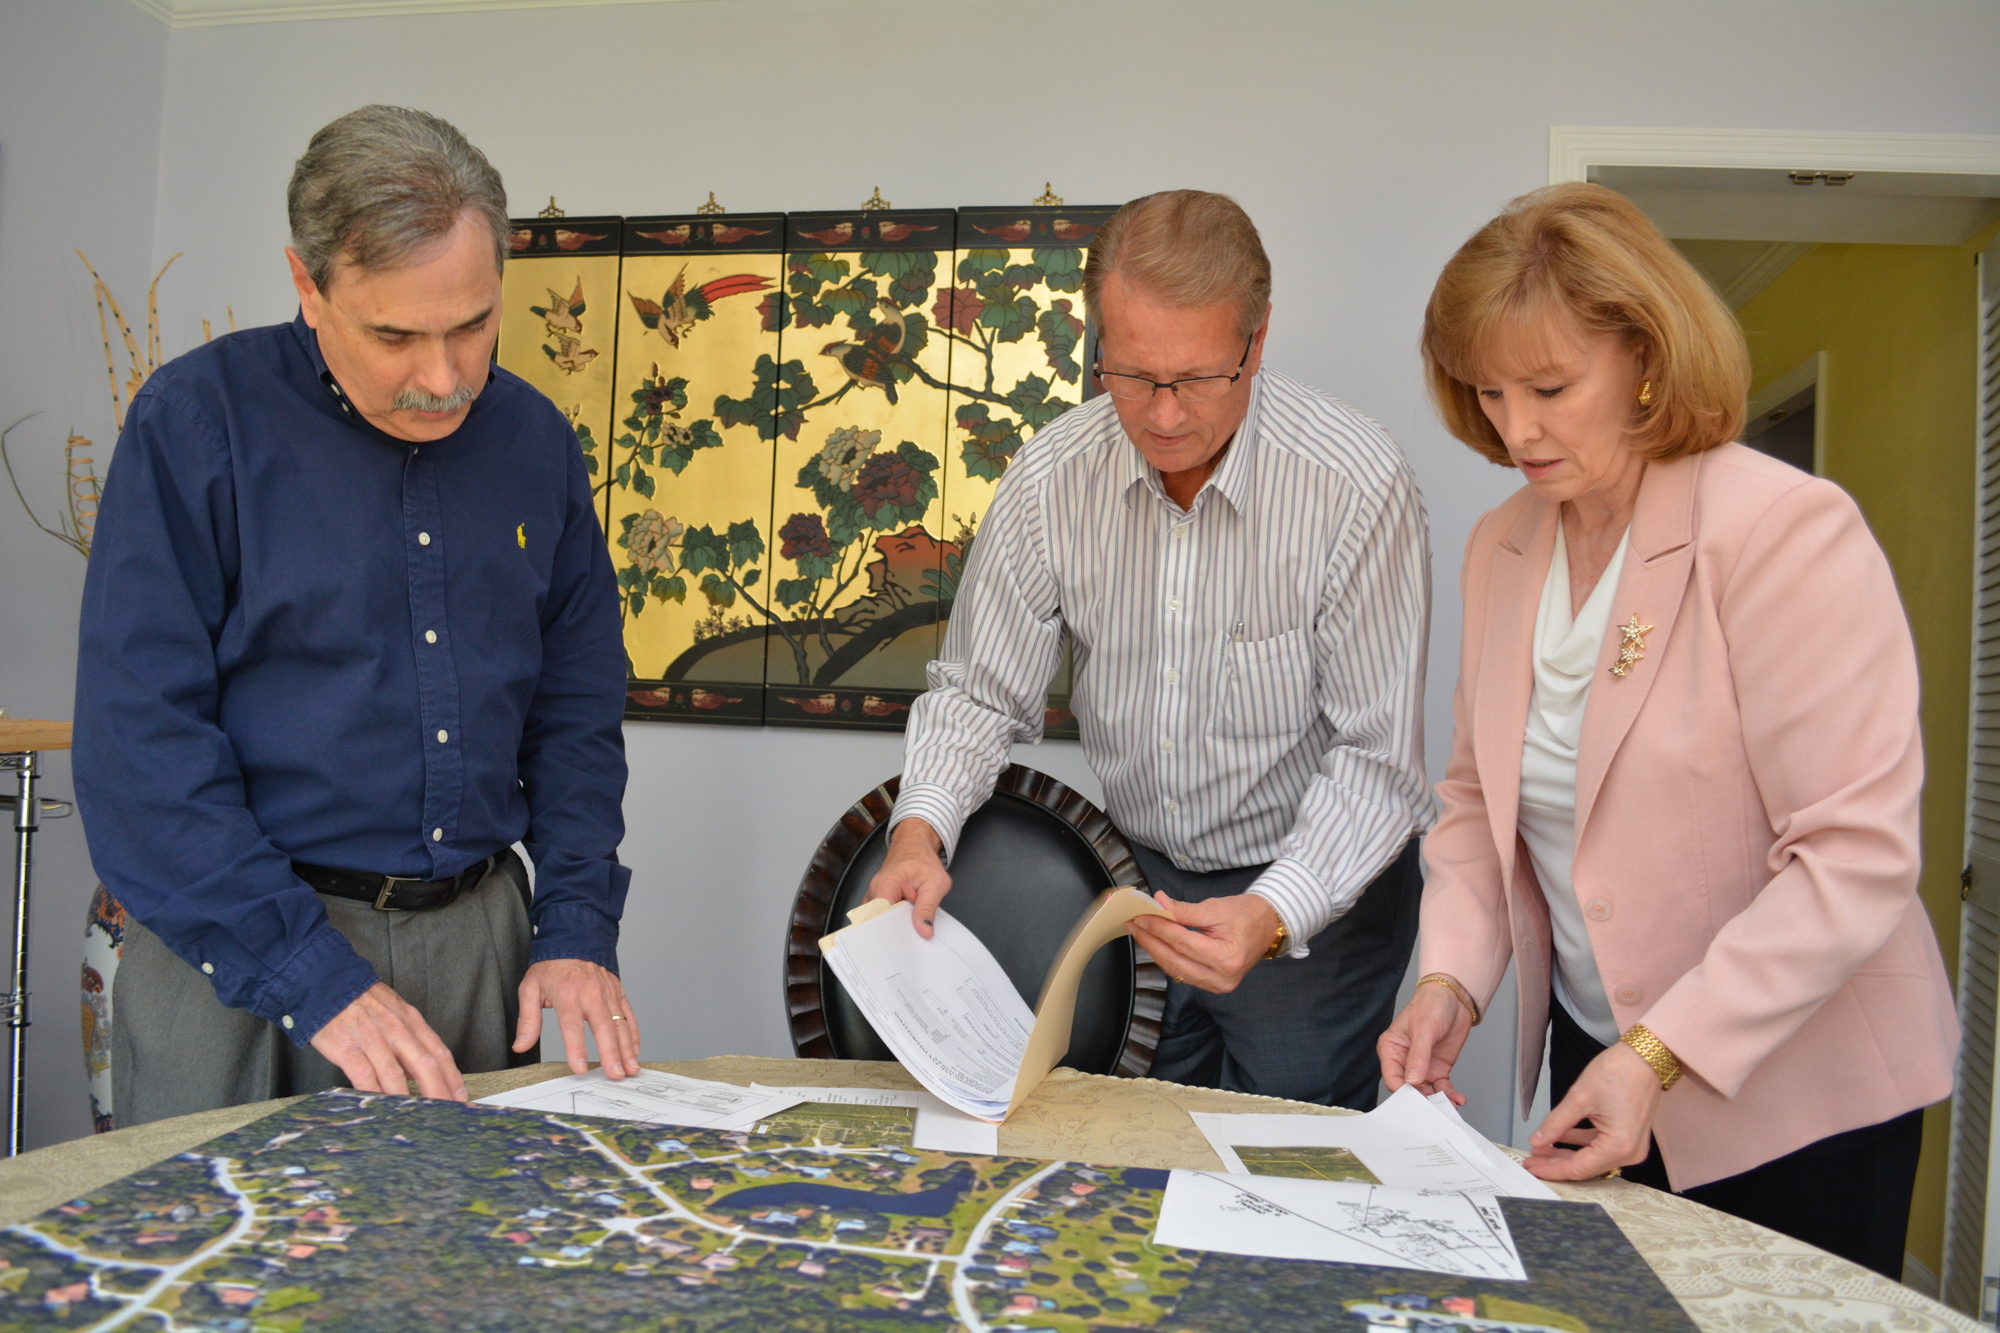 Friends of Keep Woods founders Gary Herbert, Phil St. John and Brenda Russell, all residents of Braden Woods, review documents and maps regarding the property in question. They are pursuing multiple avenues for preserving the land